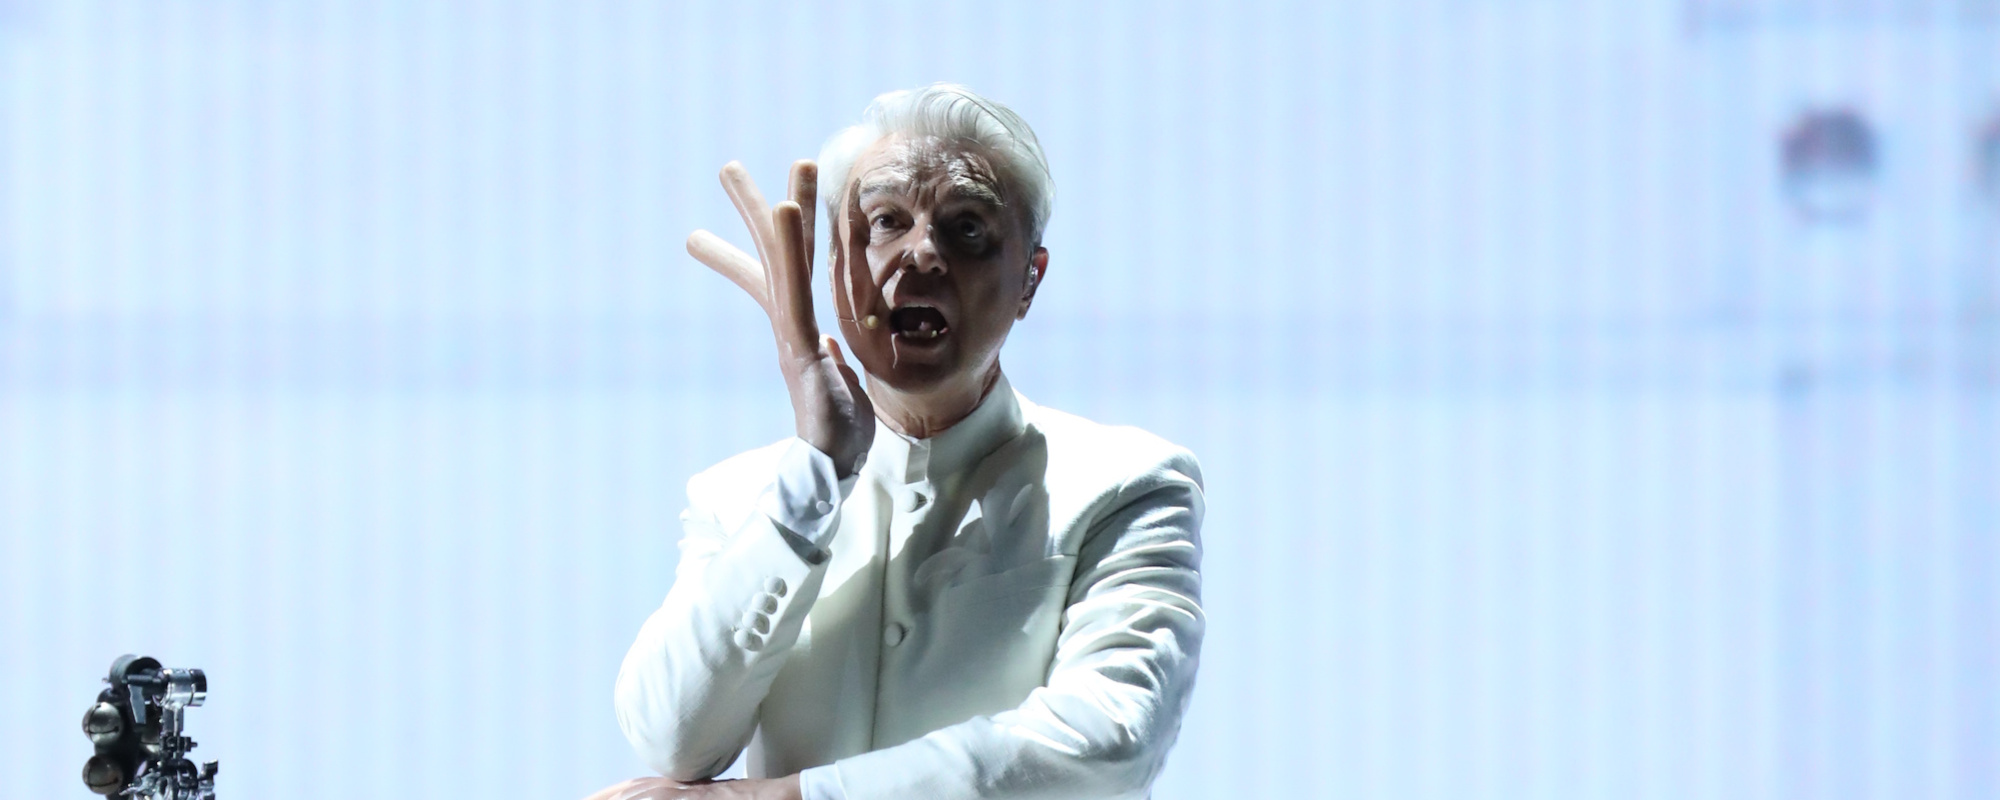 David Byrne chante "This Is a Life" de "Everything Everywhere All At Once"